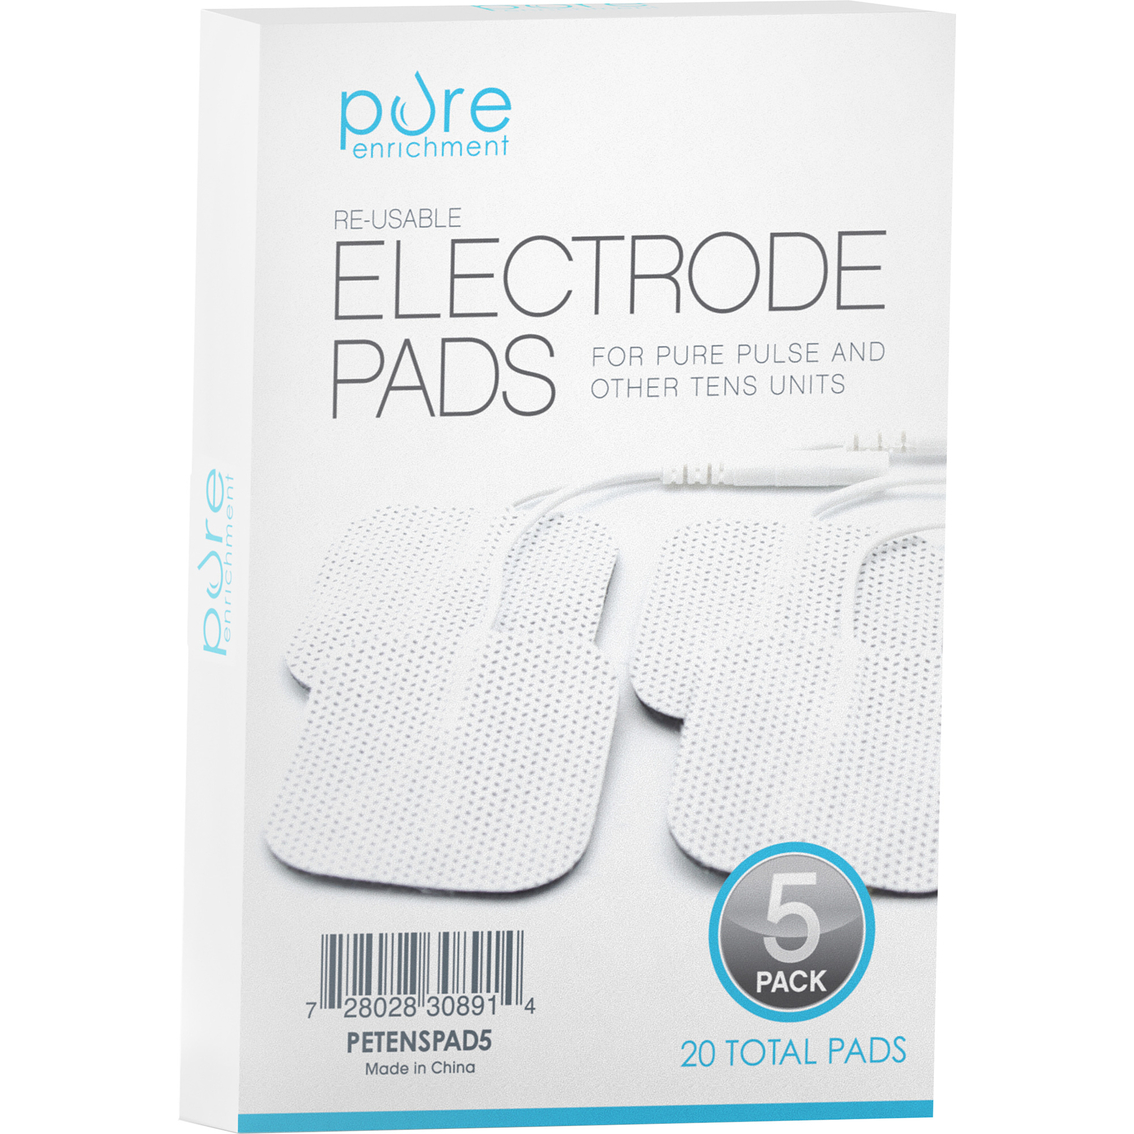 Pure Enrichment TENS Electrode Pads for PurePulse 5 pk. (20 pads) - Image 2 of 2